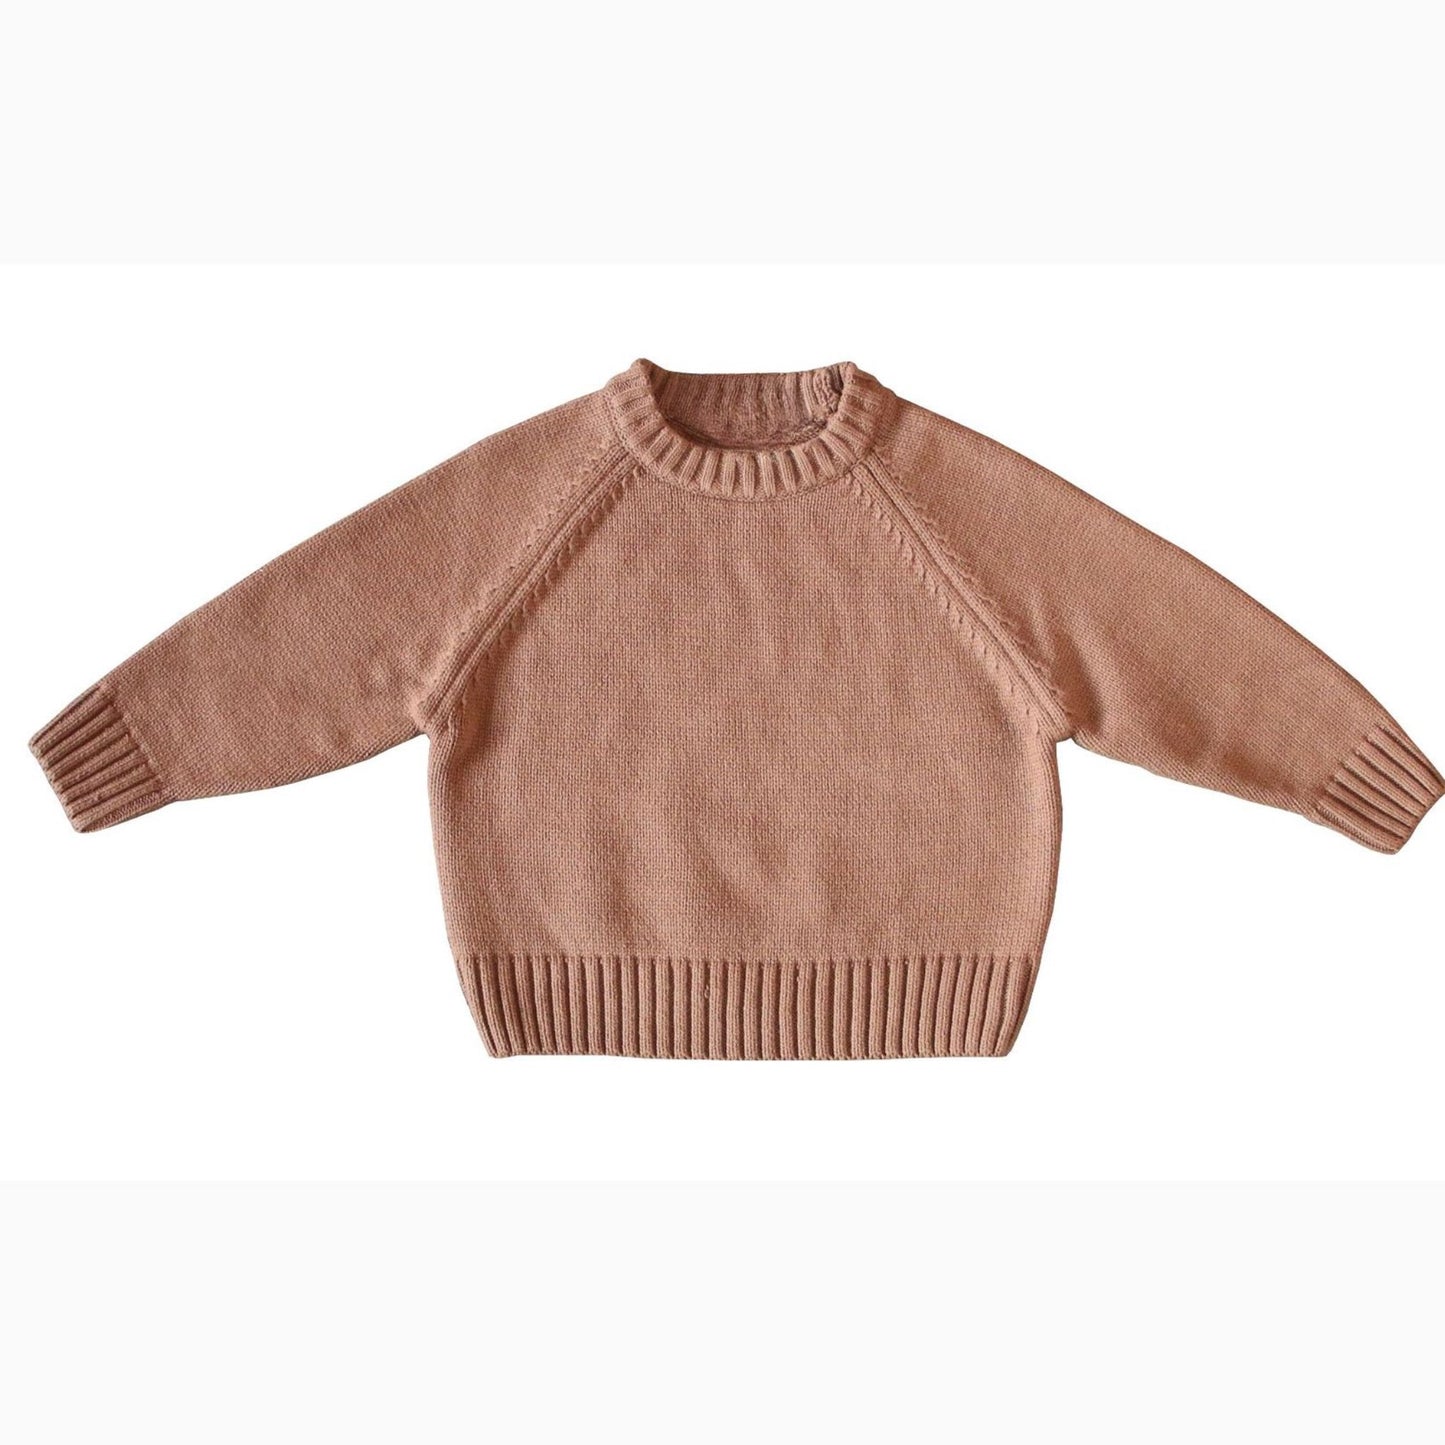 Kitted Baby Sweater